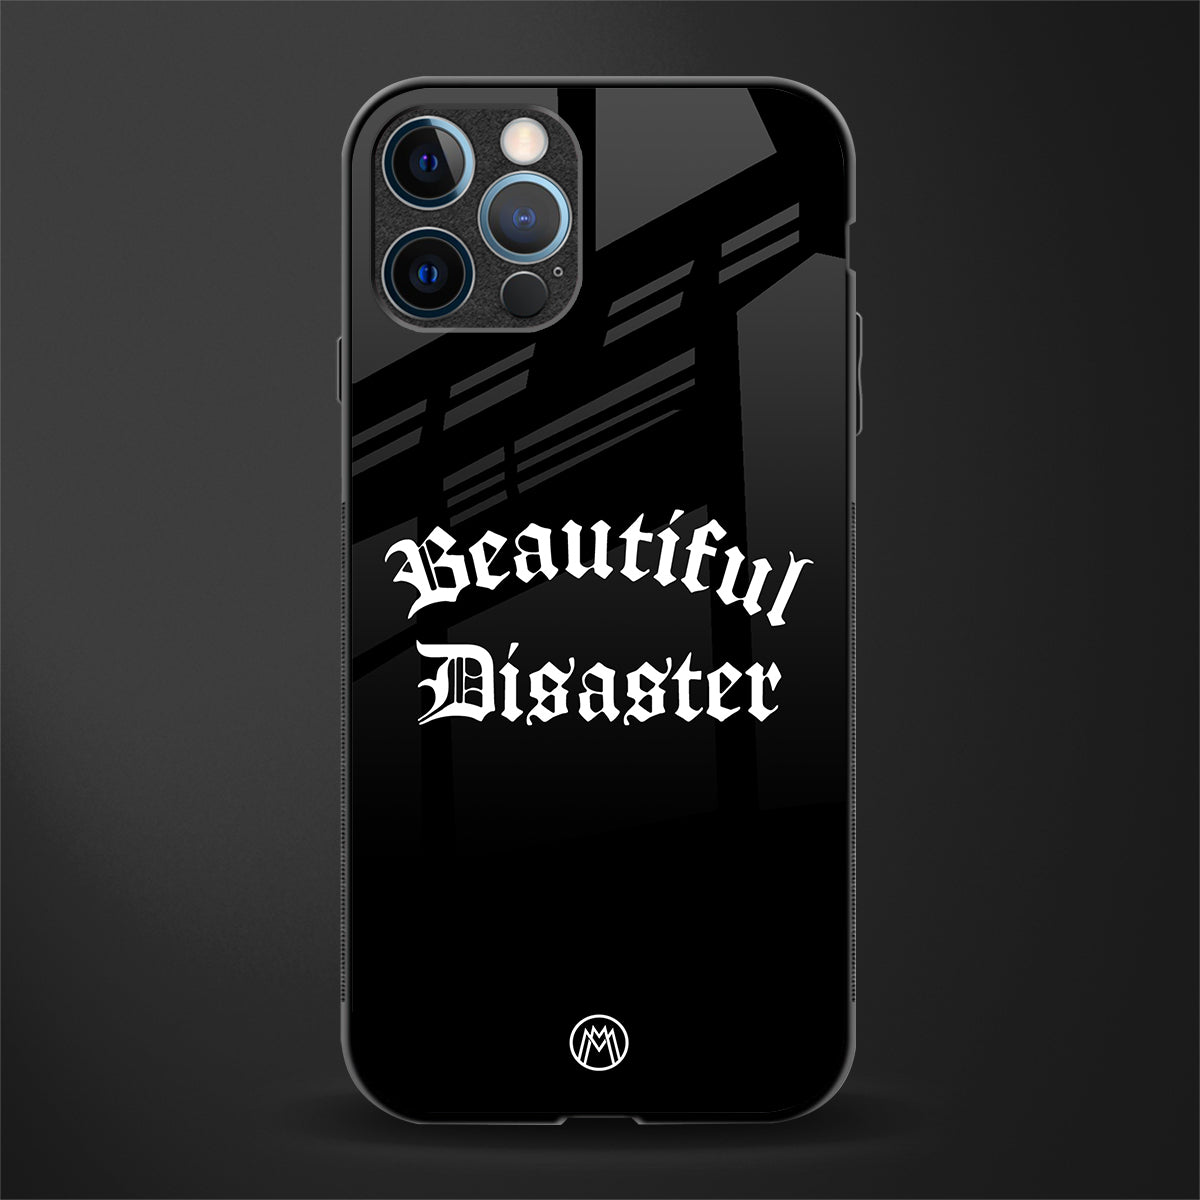 beautiful disaster glass case for iphone 12 pro max image